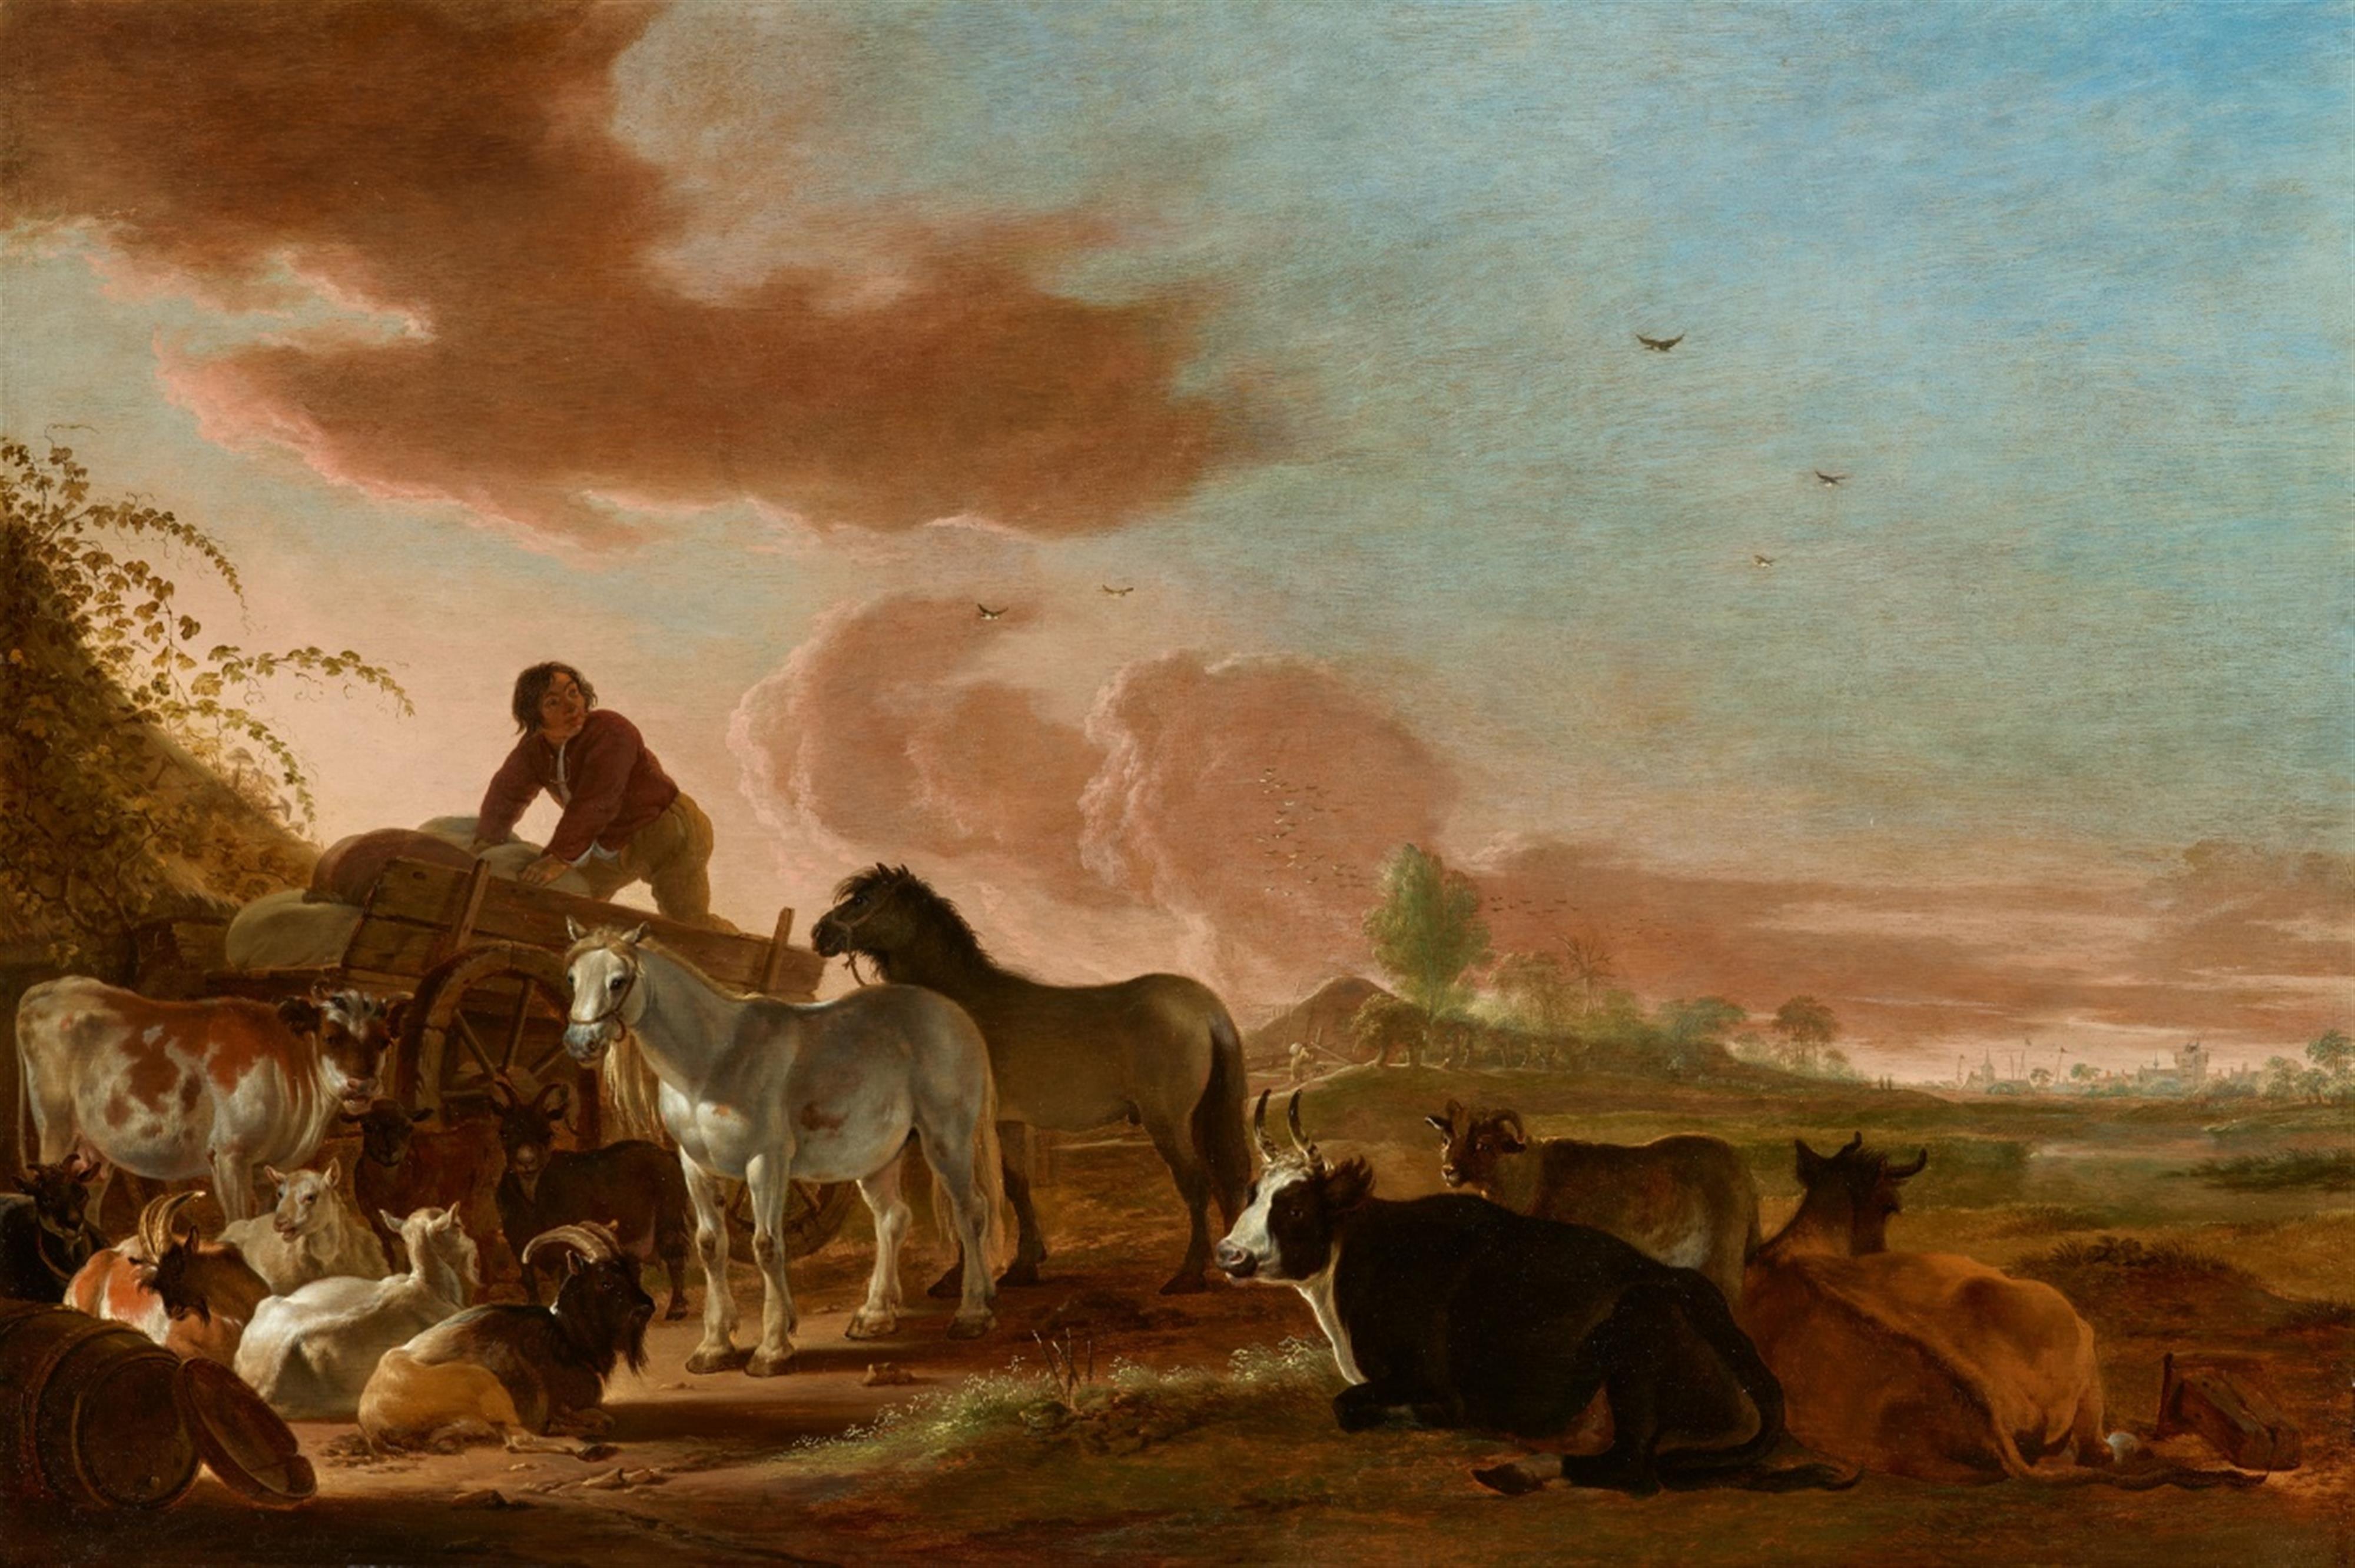 Cornelis Saftleven - Landscape with a Young Peasant on a Cart with Horses, Cattle, and Goats - image-1